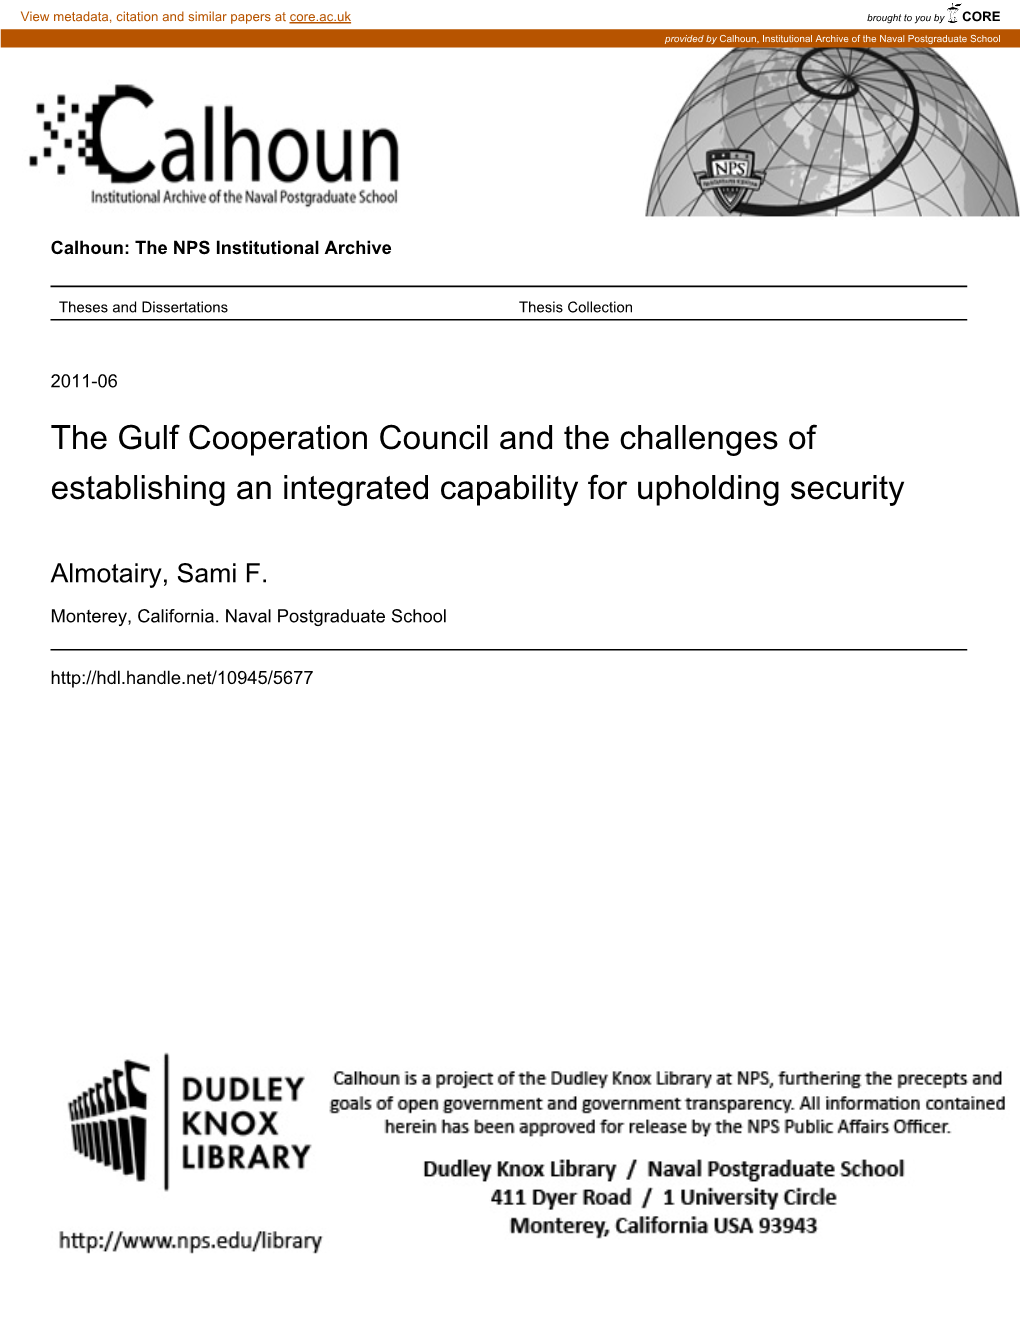 The Gulf Cooperation Council and the Challenges of Establishing an Integrated Capability for Upholding Security